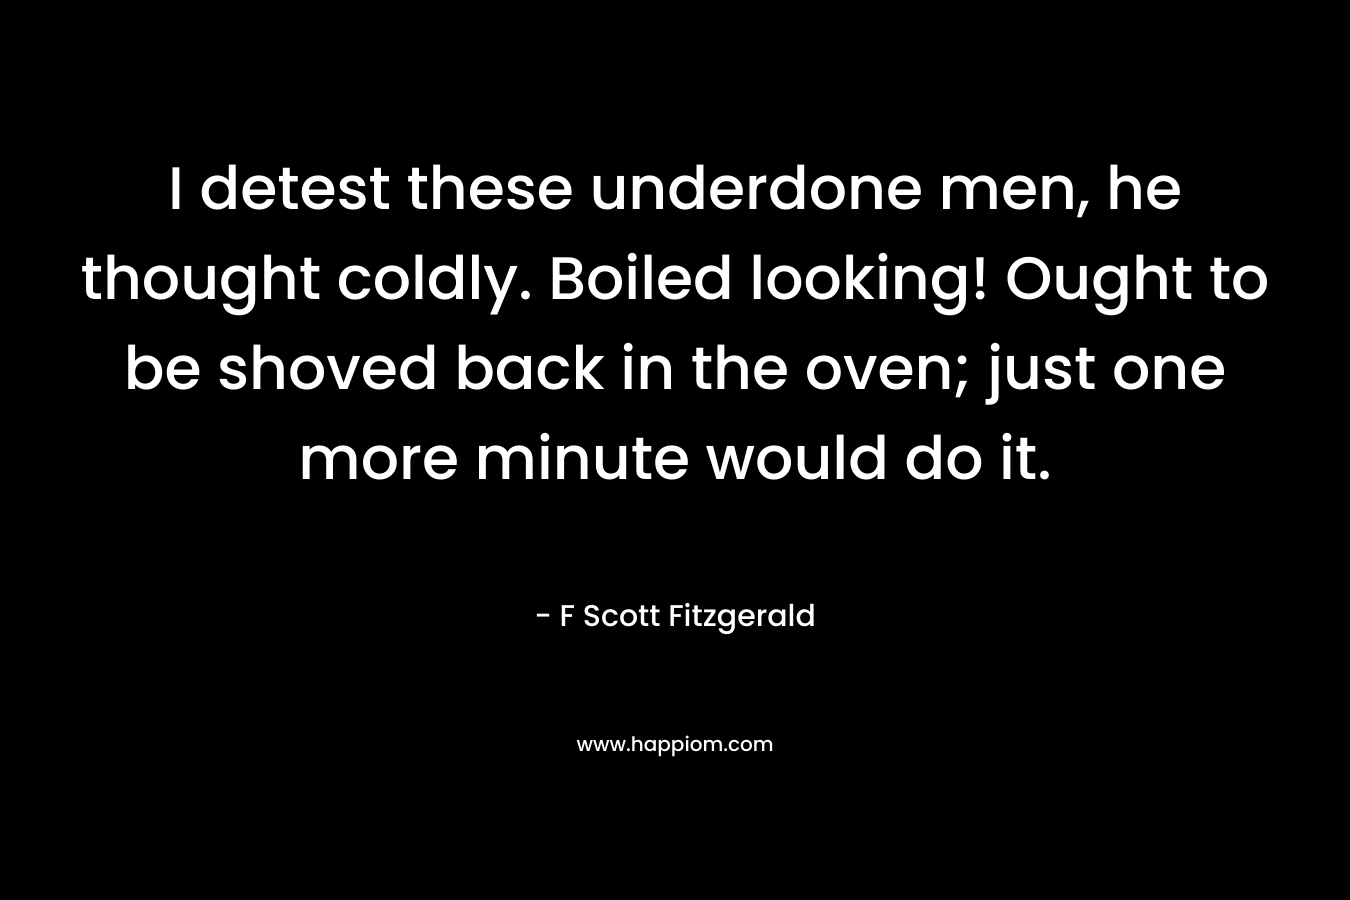 I detest these underdone men, he thought coldly. Boiled looking! Ought to be shoved back in the oven; just one more minute would do it. – F Scott Fitzgerald